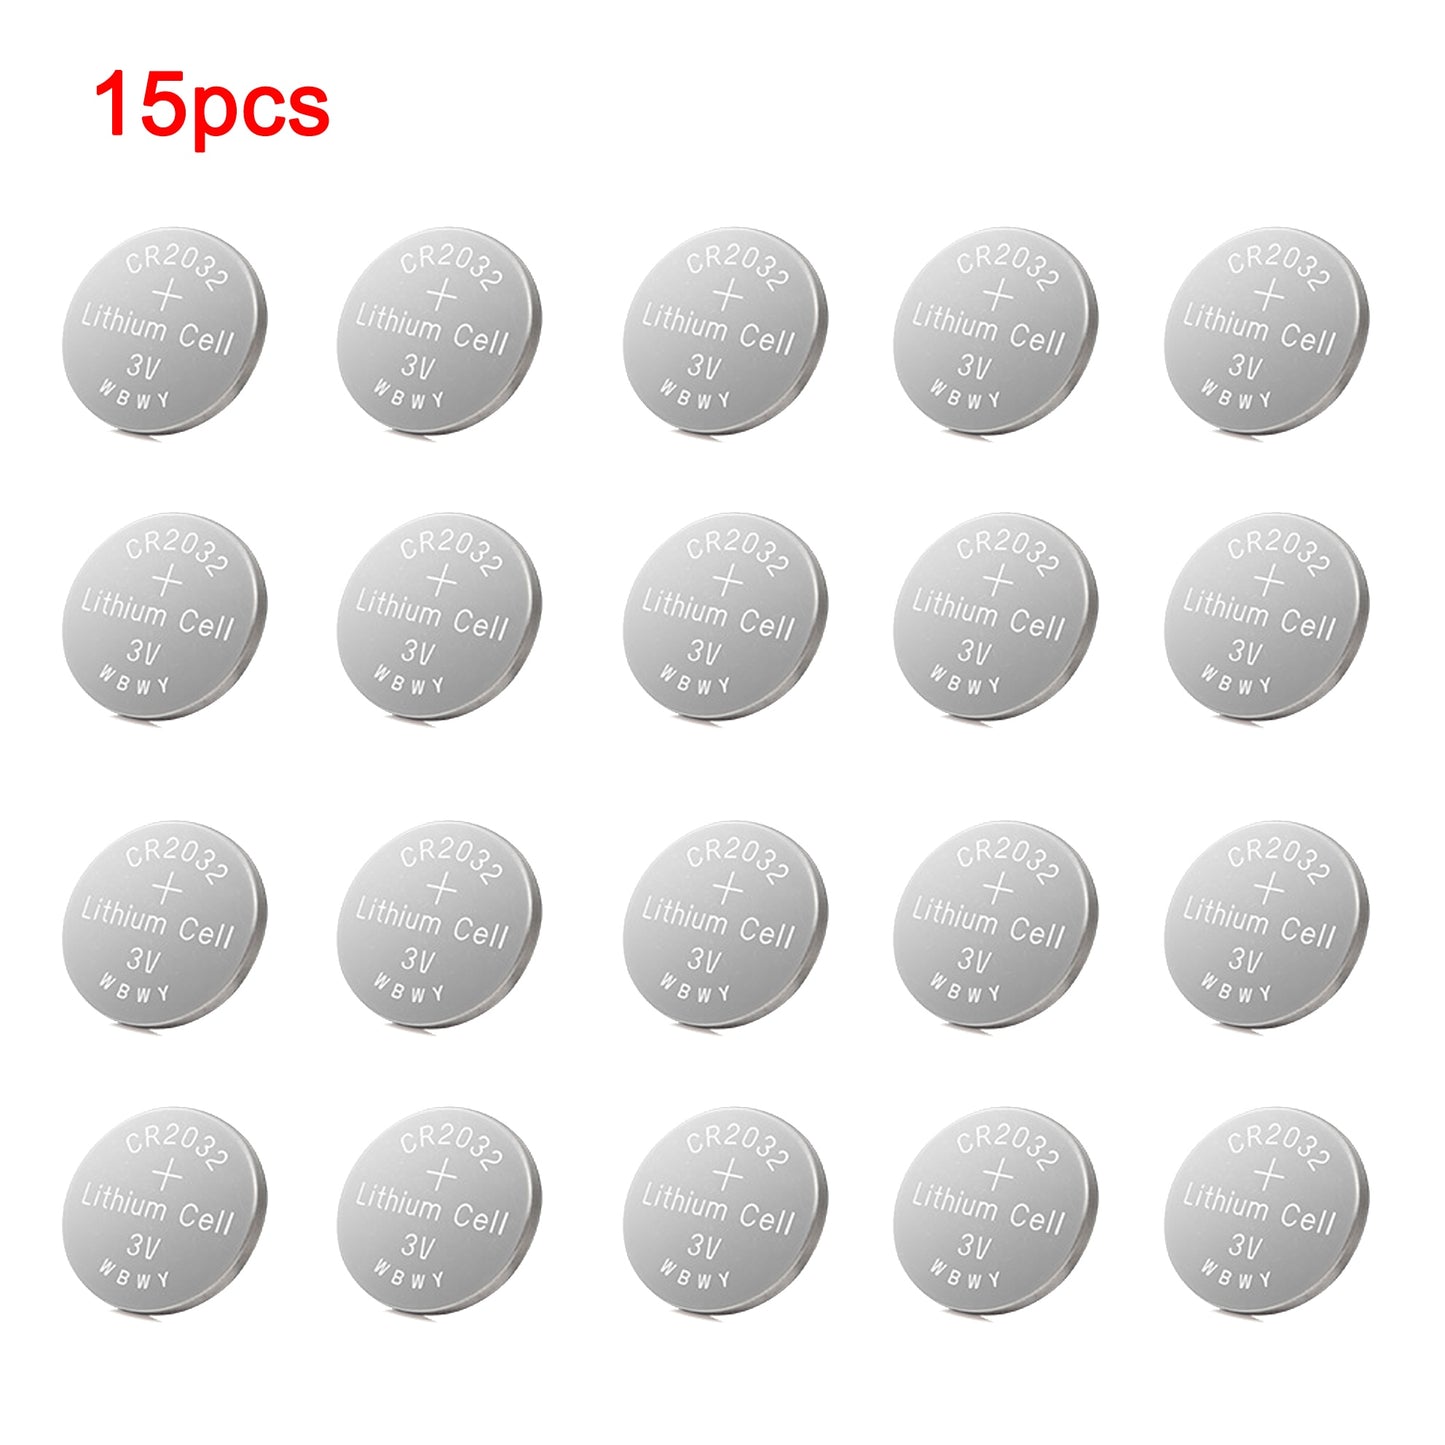 Lithuim Cell Button 3V CR2032 BR2032 DL2032 ECR2032 Lithium Li-ion Batteries for Electronic Watch LED Light Toy Remote 5Pcs